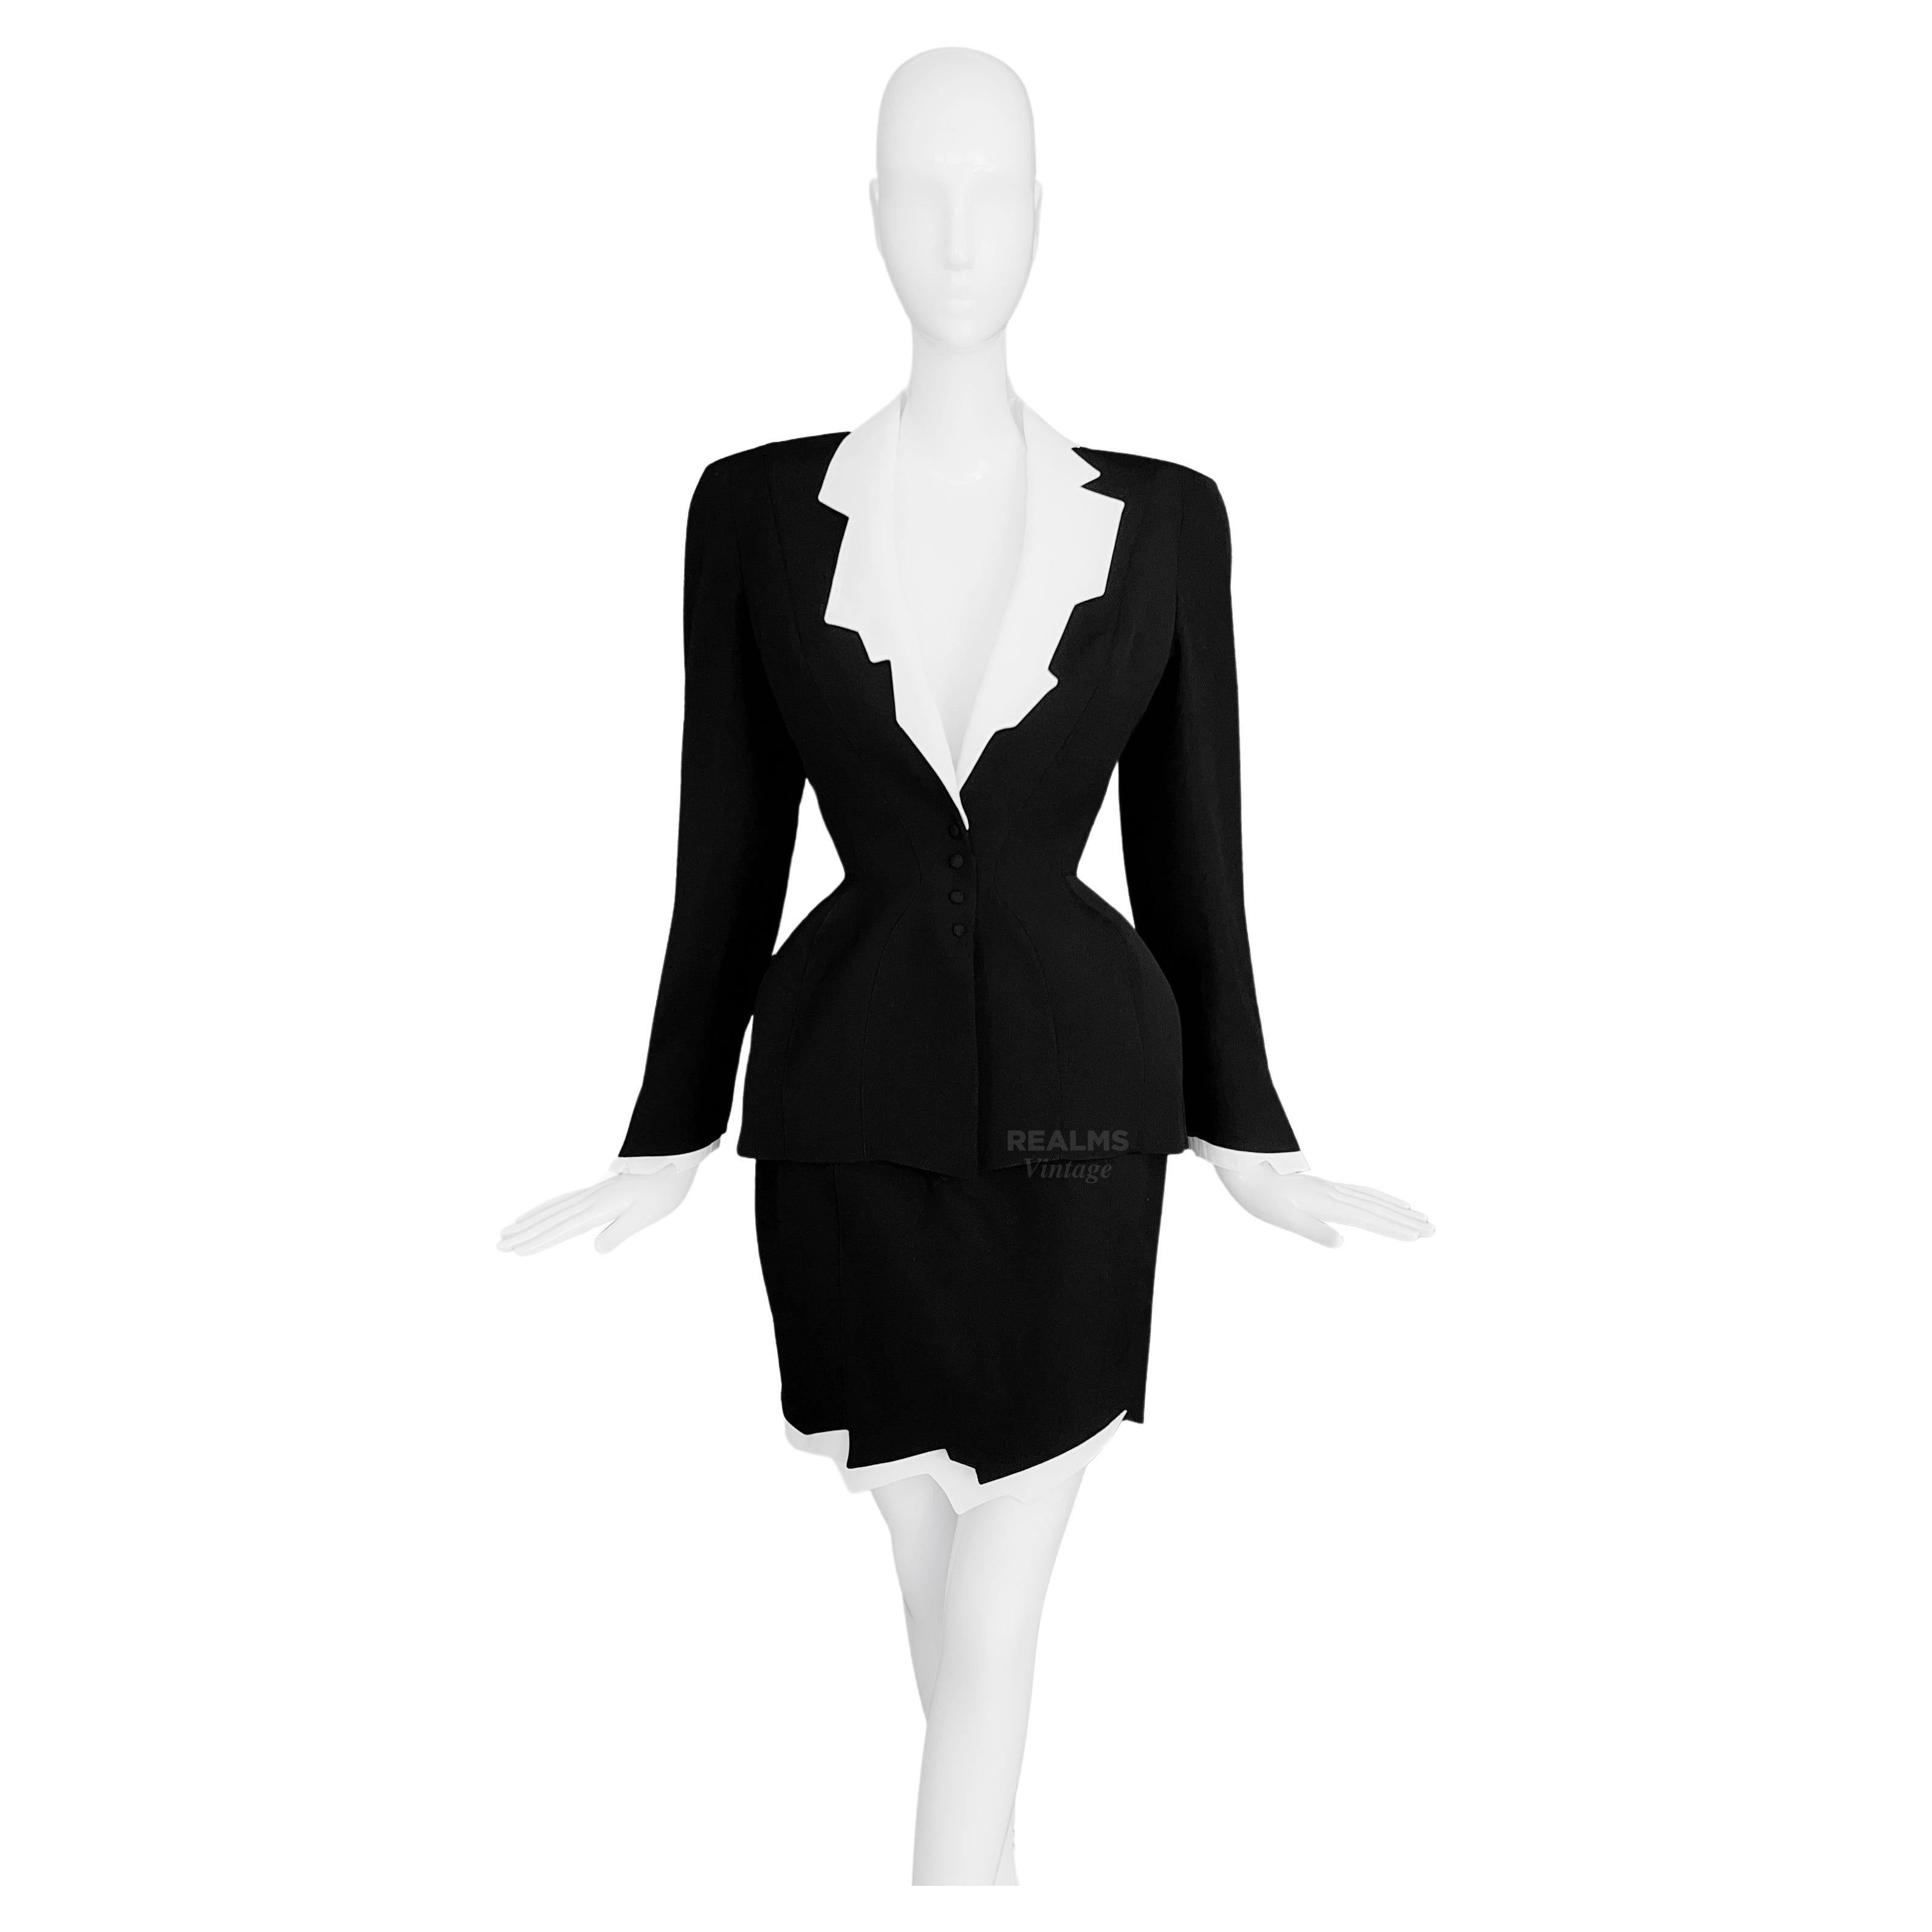 Thierry Mugler SS1994 Archival Iconic Runway Suit Sculptural ZigZag Jacket Skirt For Sale